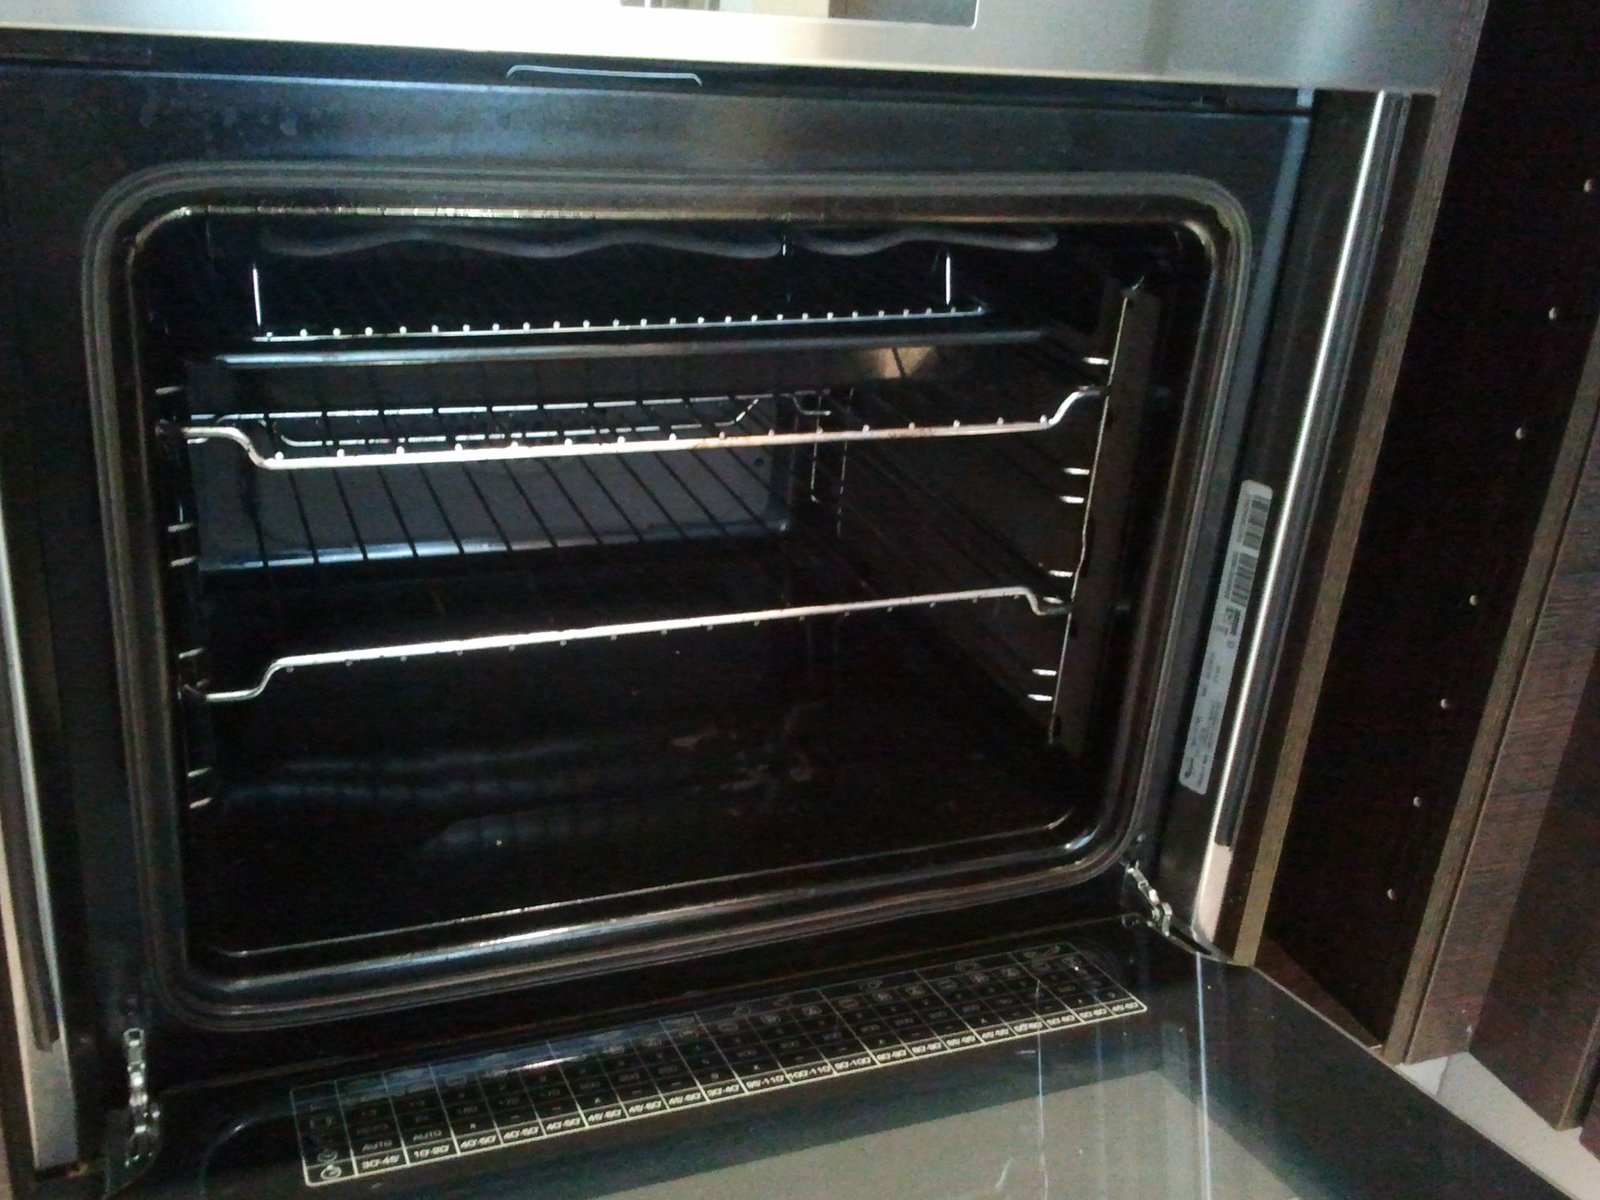 how to self-clean a Samsung oven?